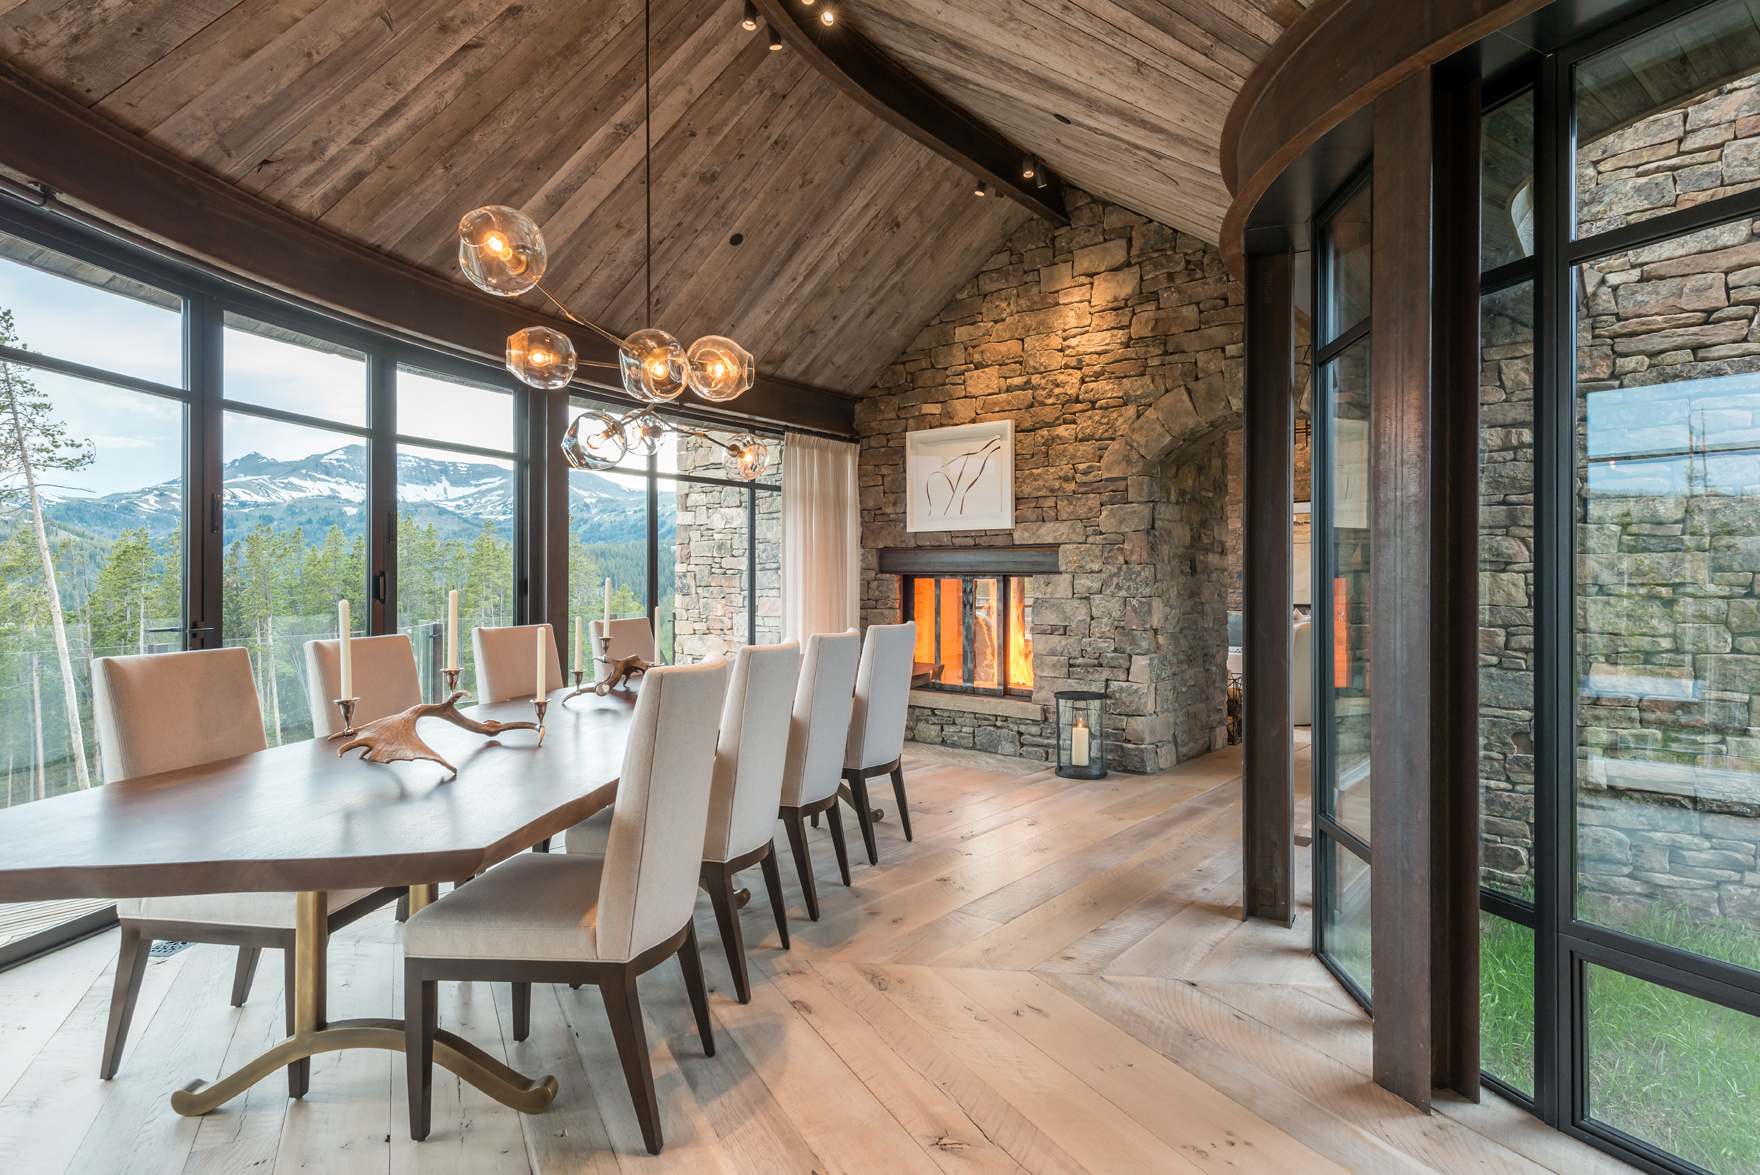 The dining room’s curved glass walls are mirrored by a custom-made curved table in this Montana home by JLF Architects and WRJ Design (photo by Audrey Hall; not from “Natural Elegance” book).